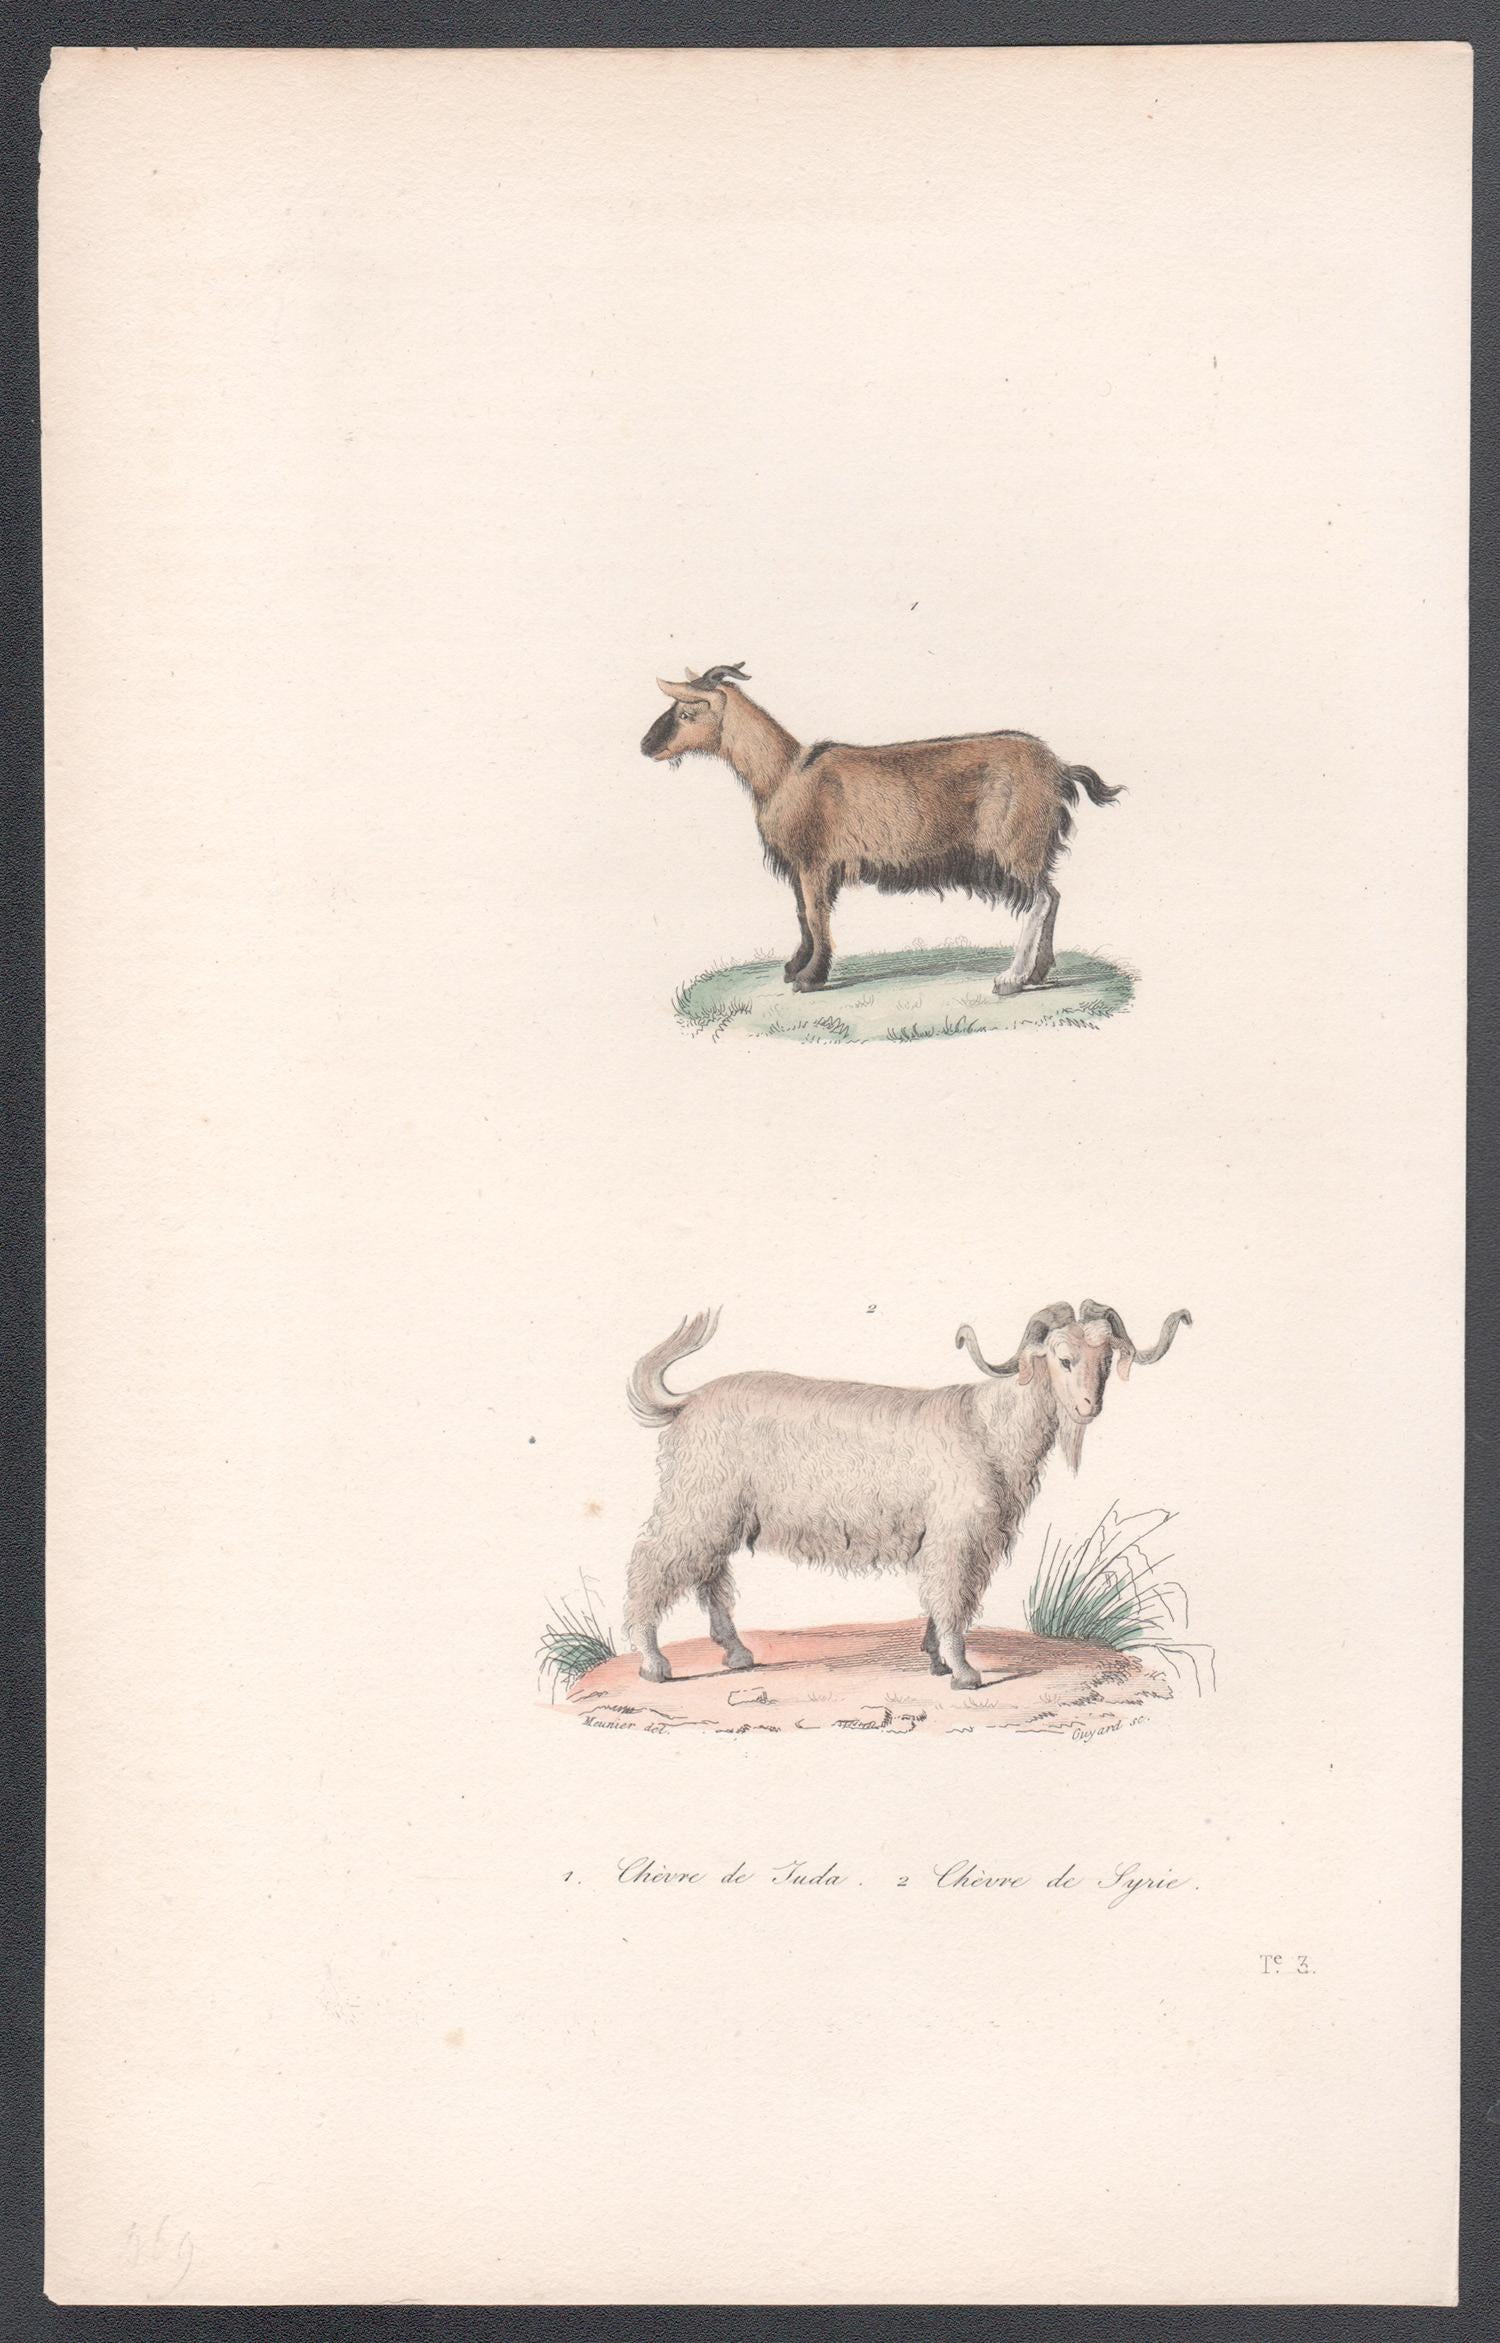 Goats, mid 19th French century animal engraving - Print by Unknown